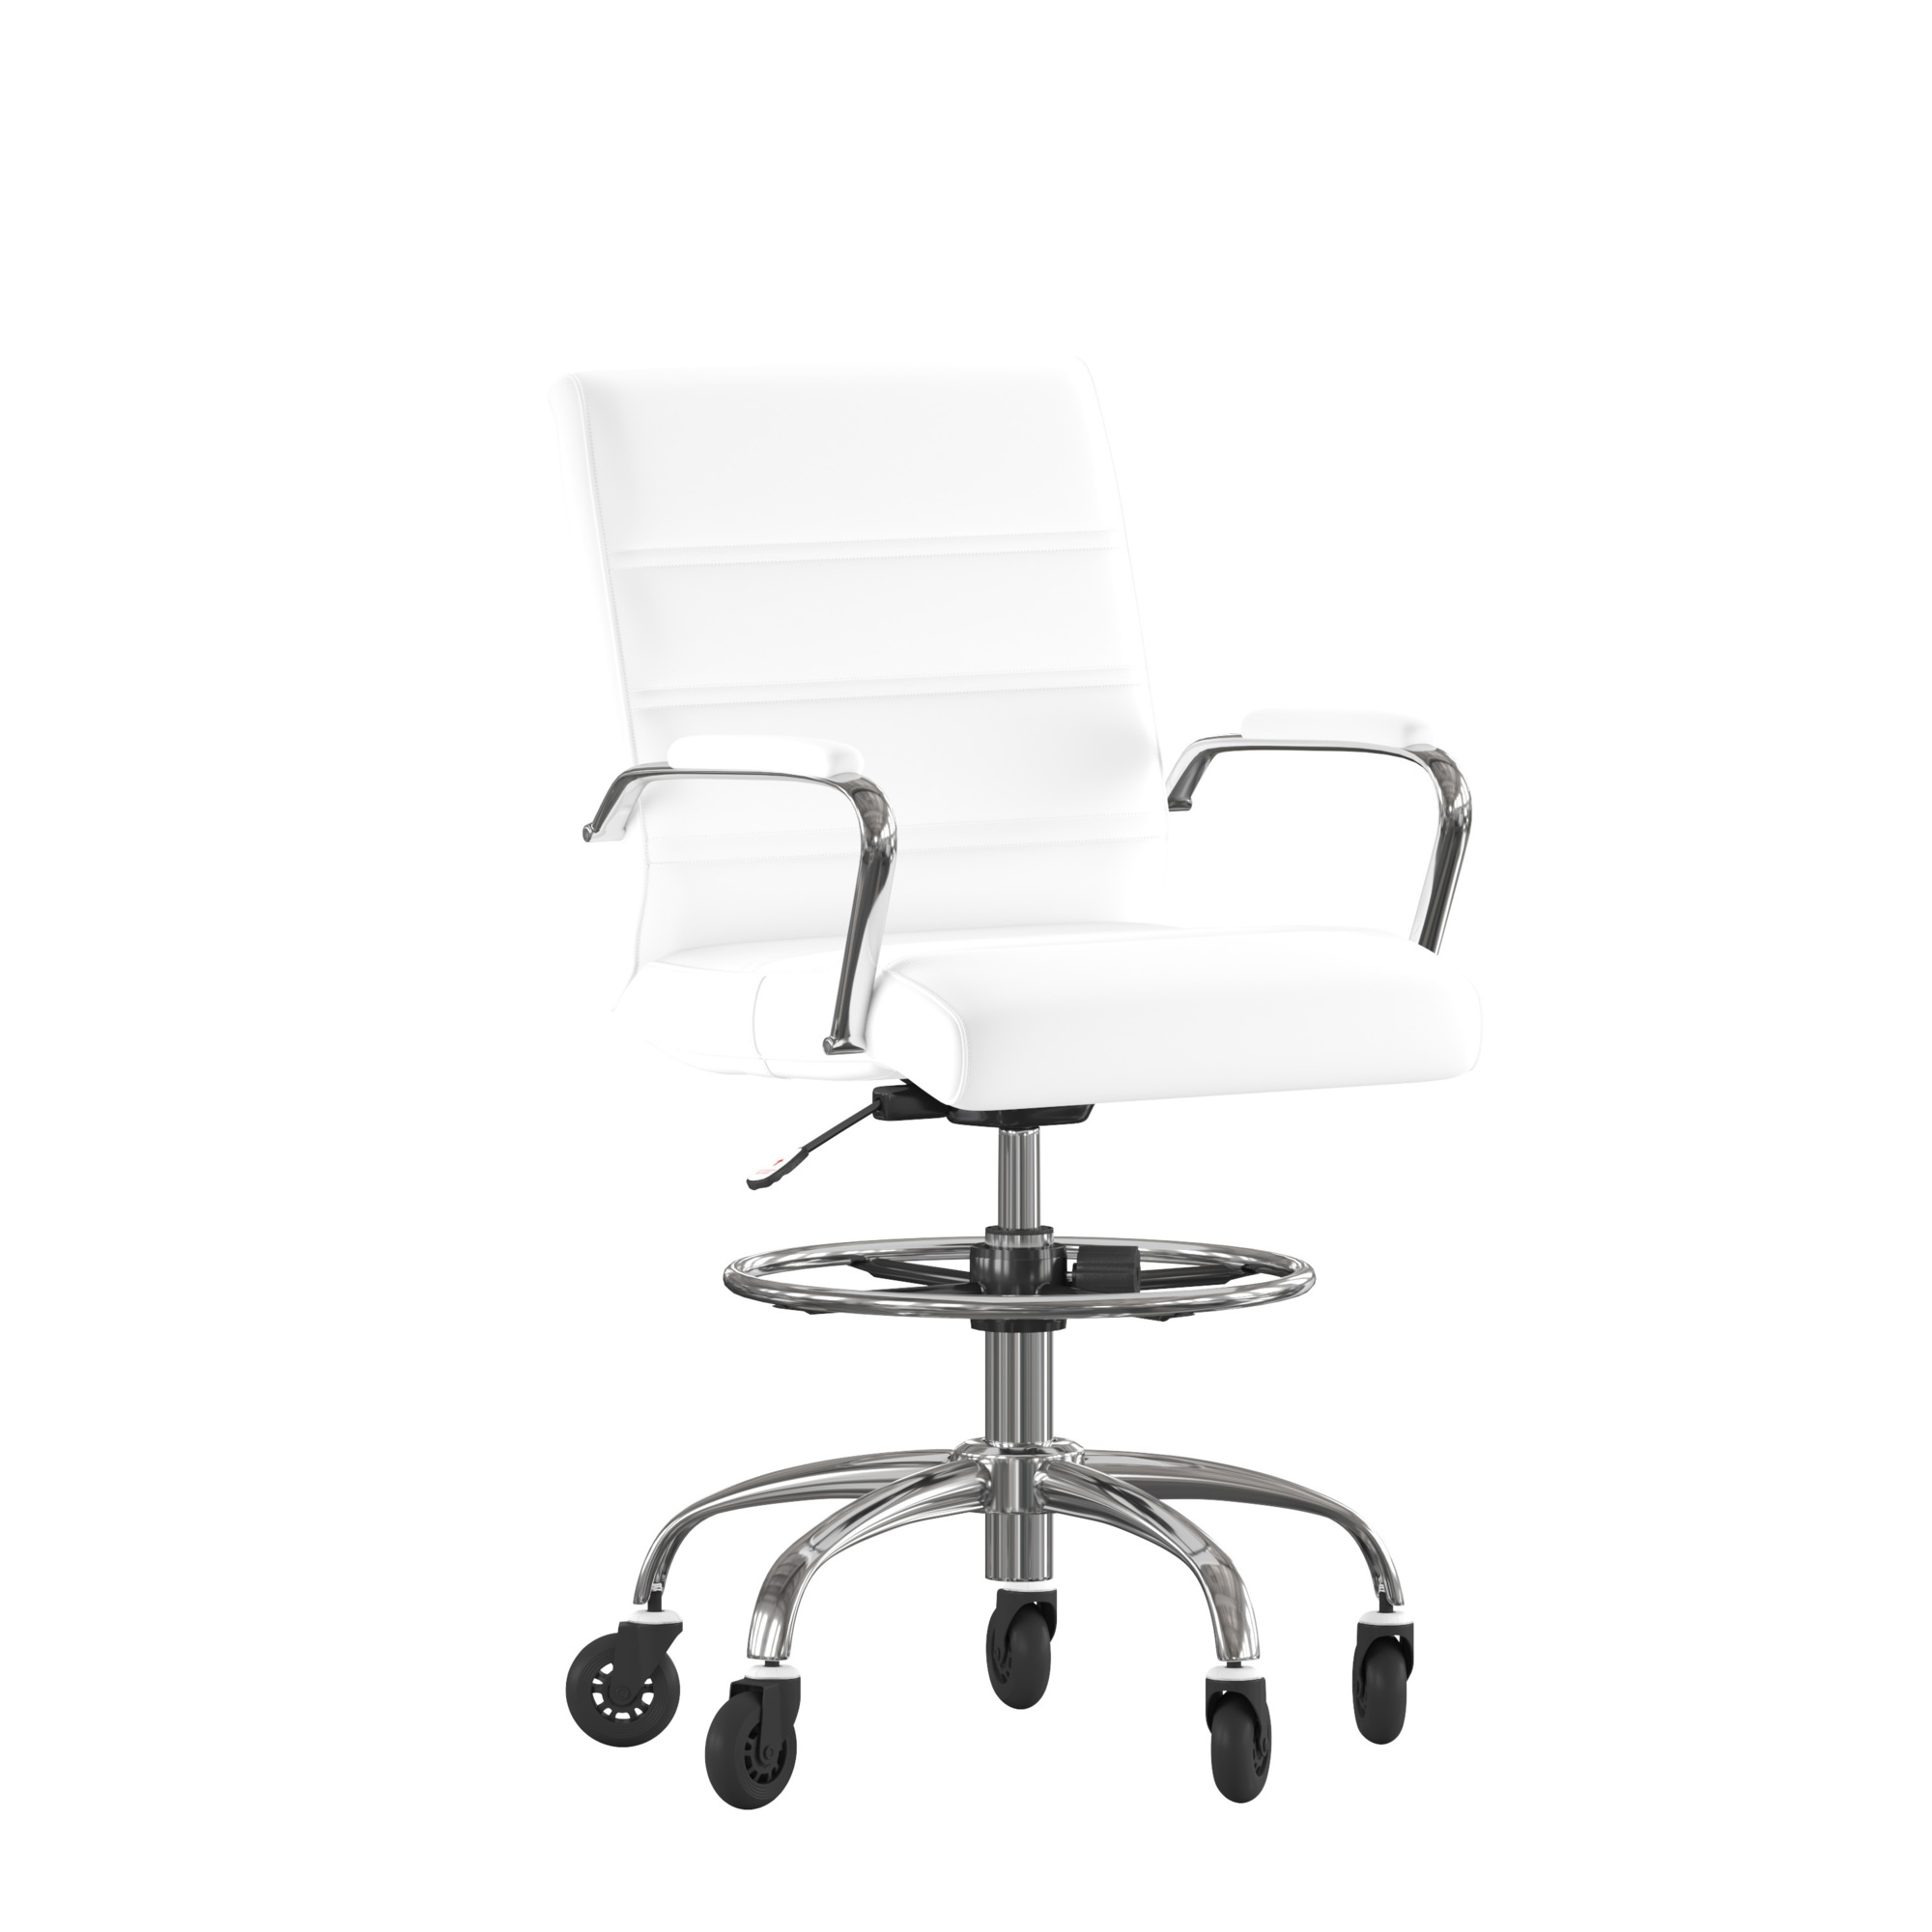 Flash Furniture, White LeatherSoft Drafting Chair with Skate Wheels, Primary Color White, Included (qty.) 2, Model GO2286BWHRLB